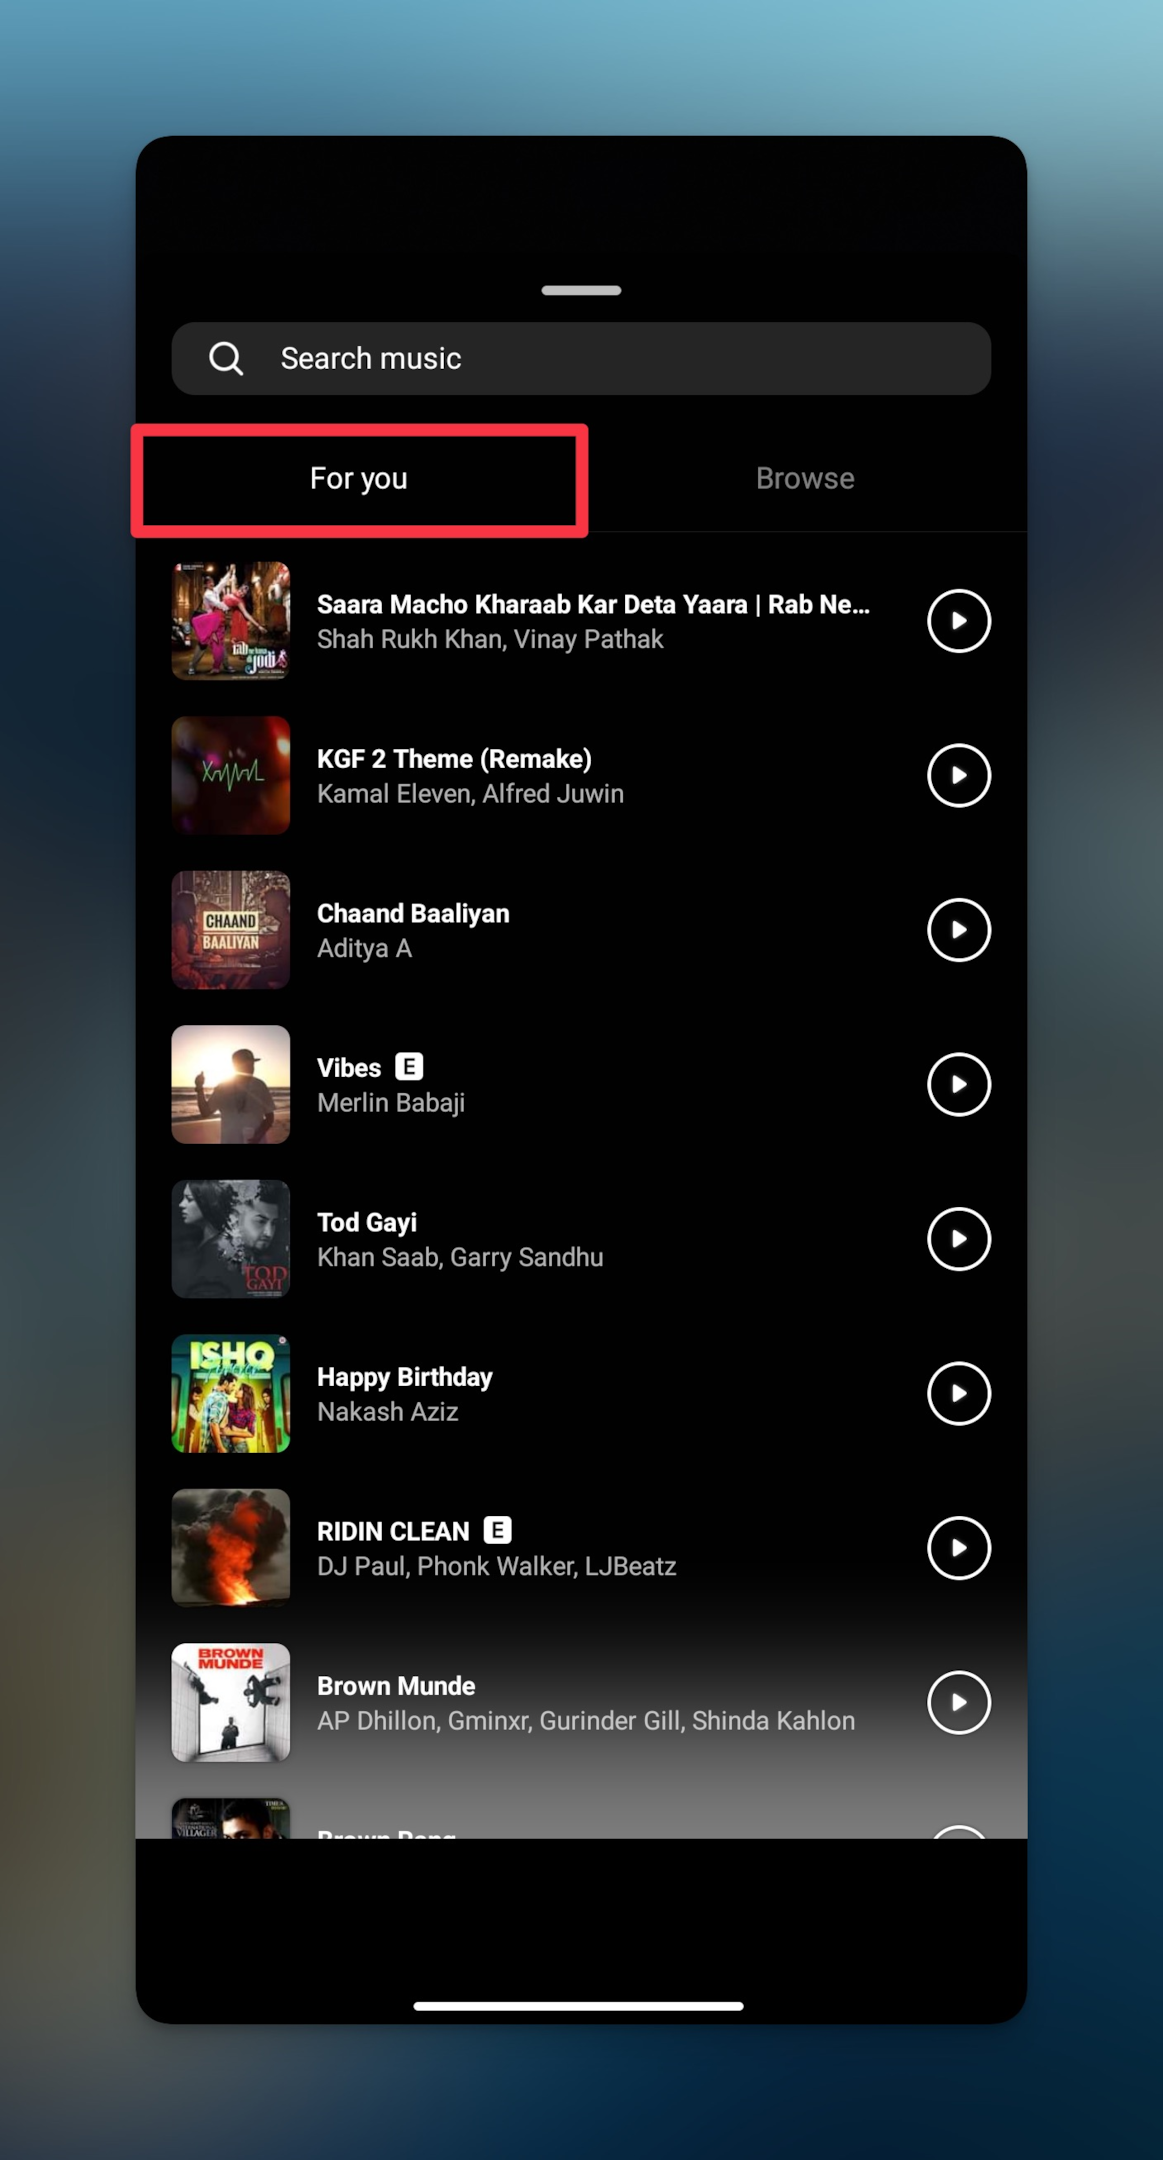 Remote.tools shows how to search for specific song in the Instagram's music library